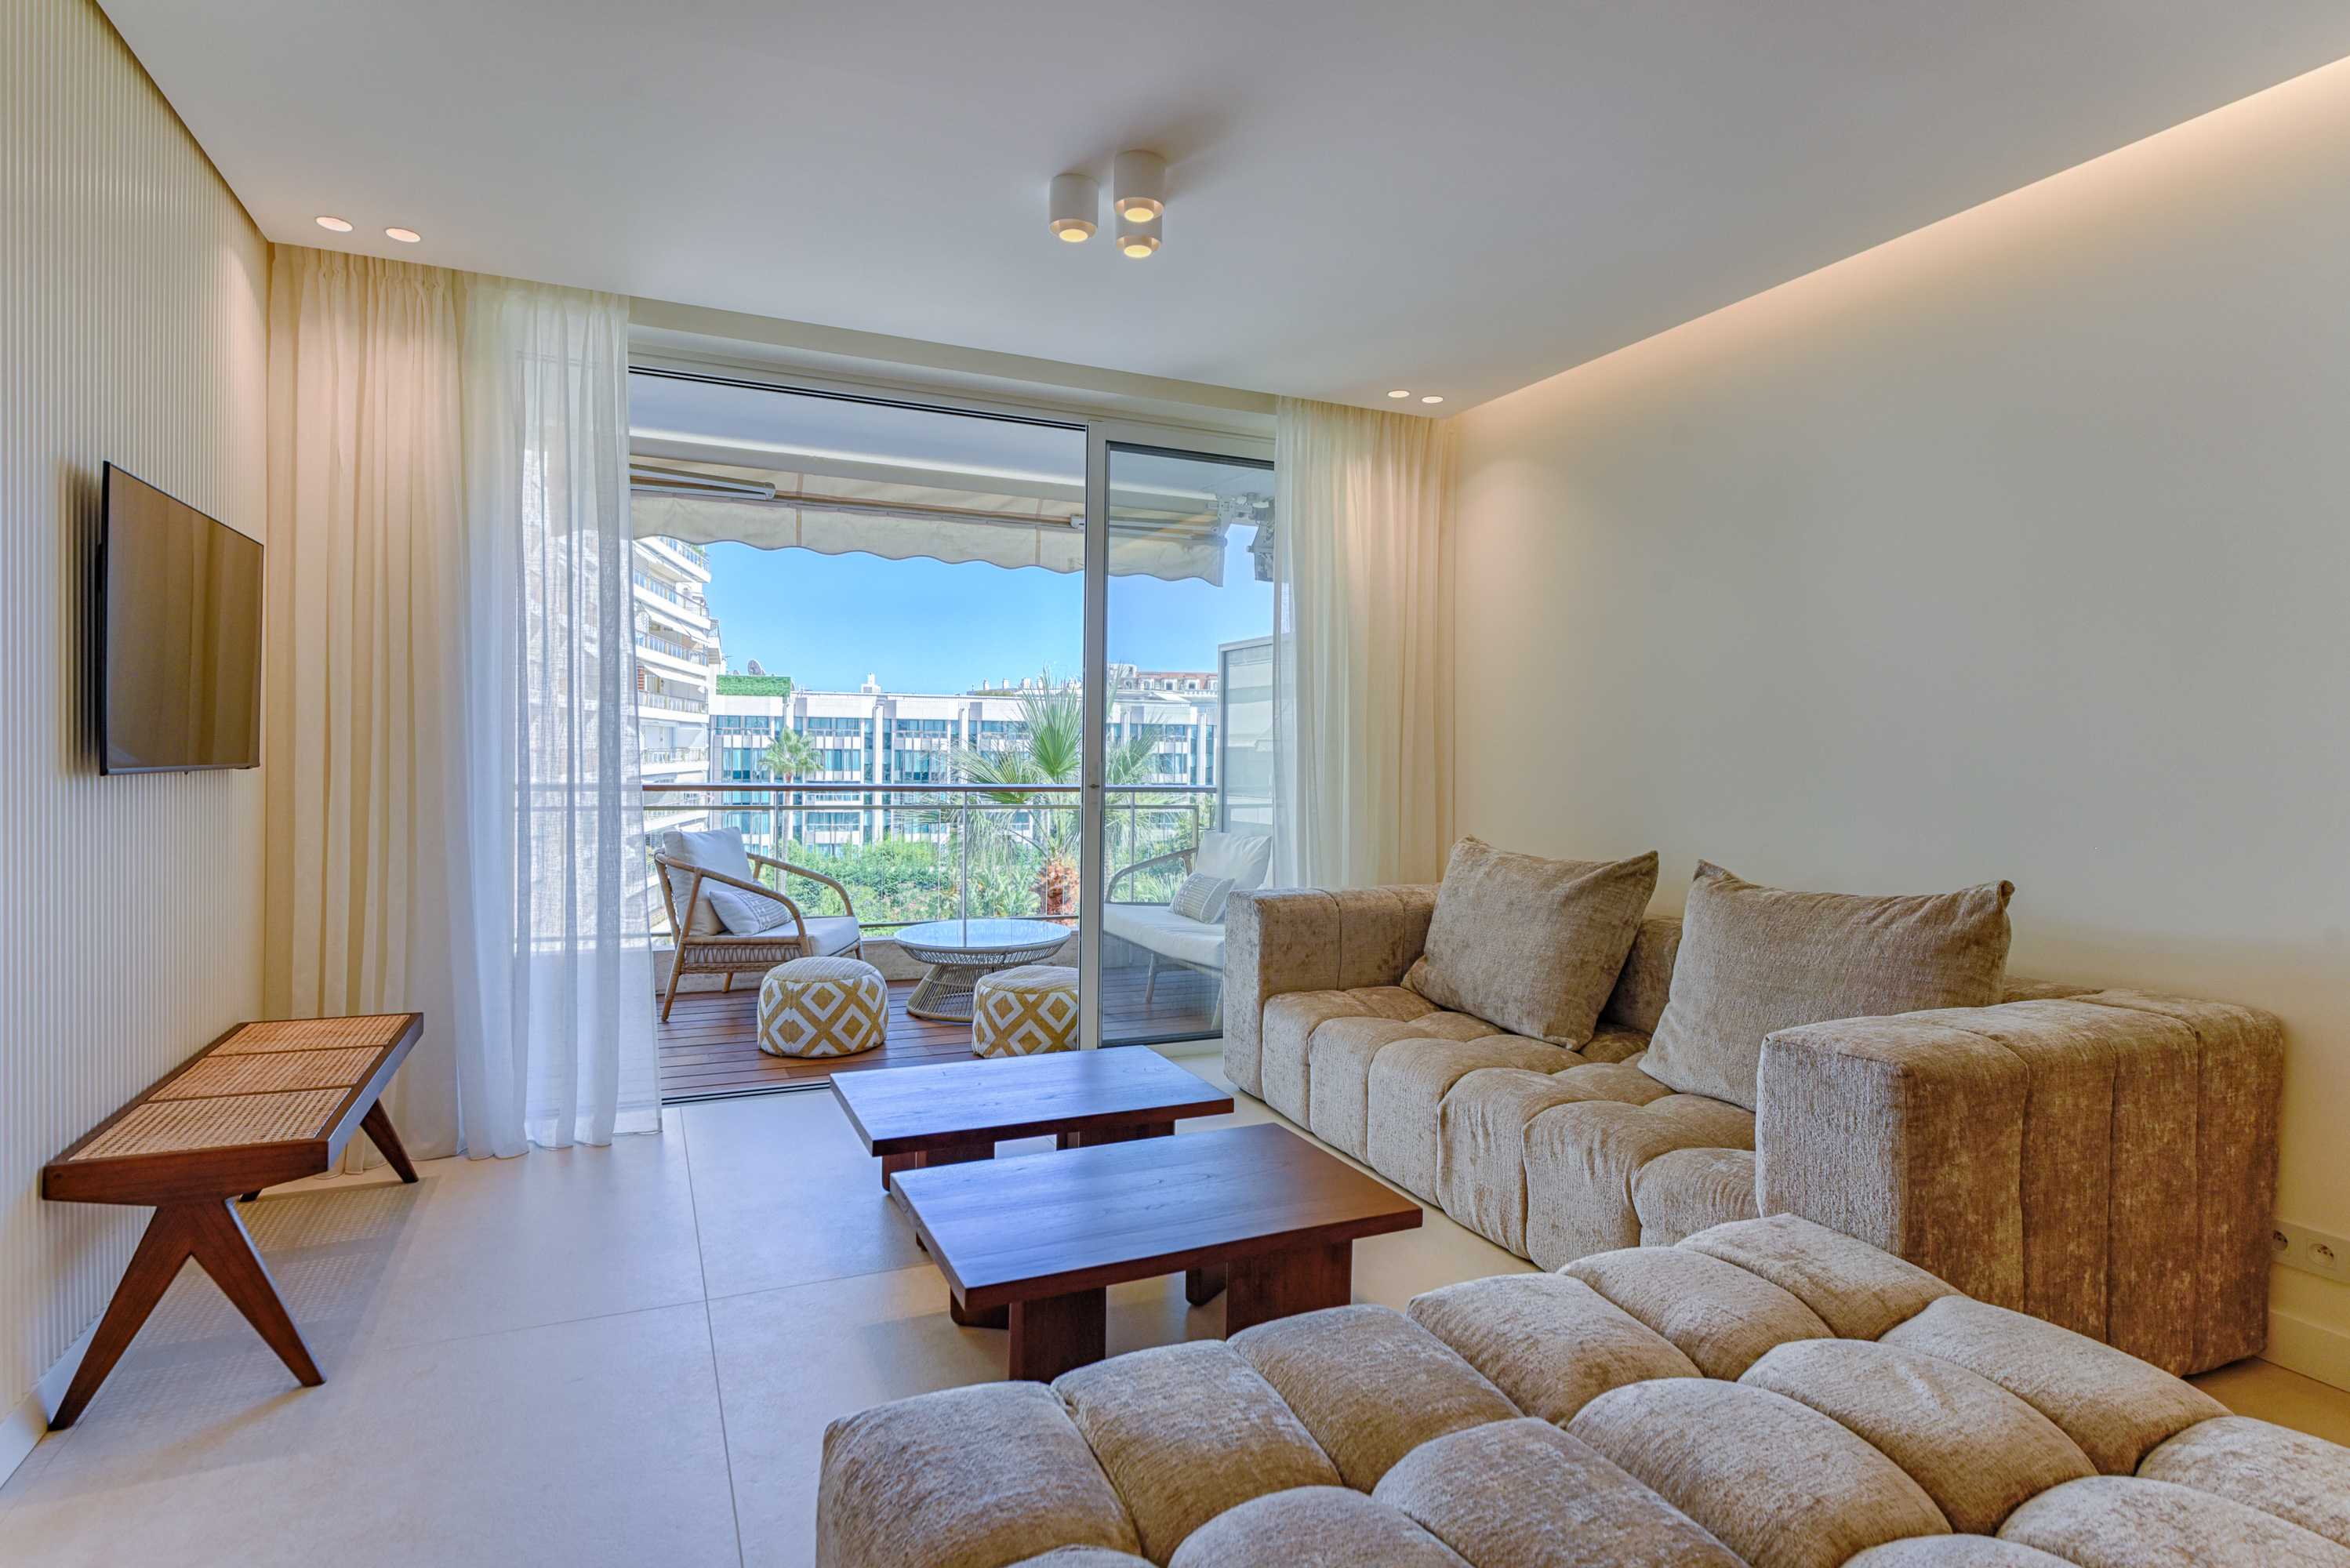 Property Image 1 - Luxurious apartment with terrace 6P / 3BR - Grand Hotel - Croisette Cannes